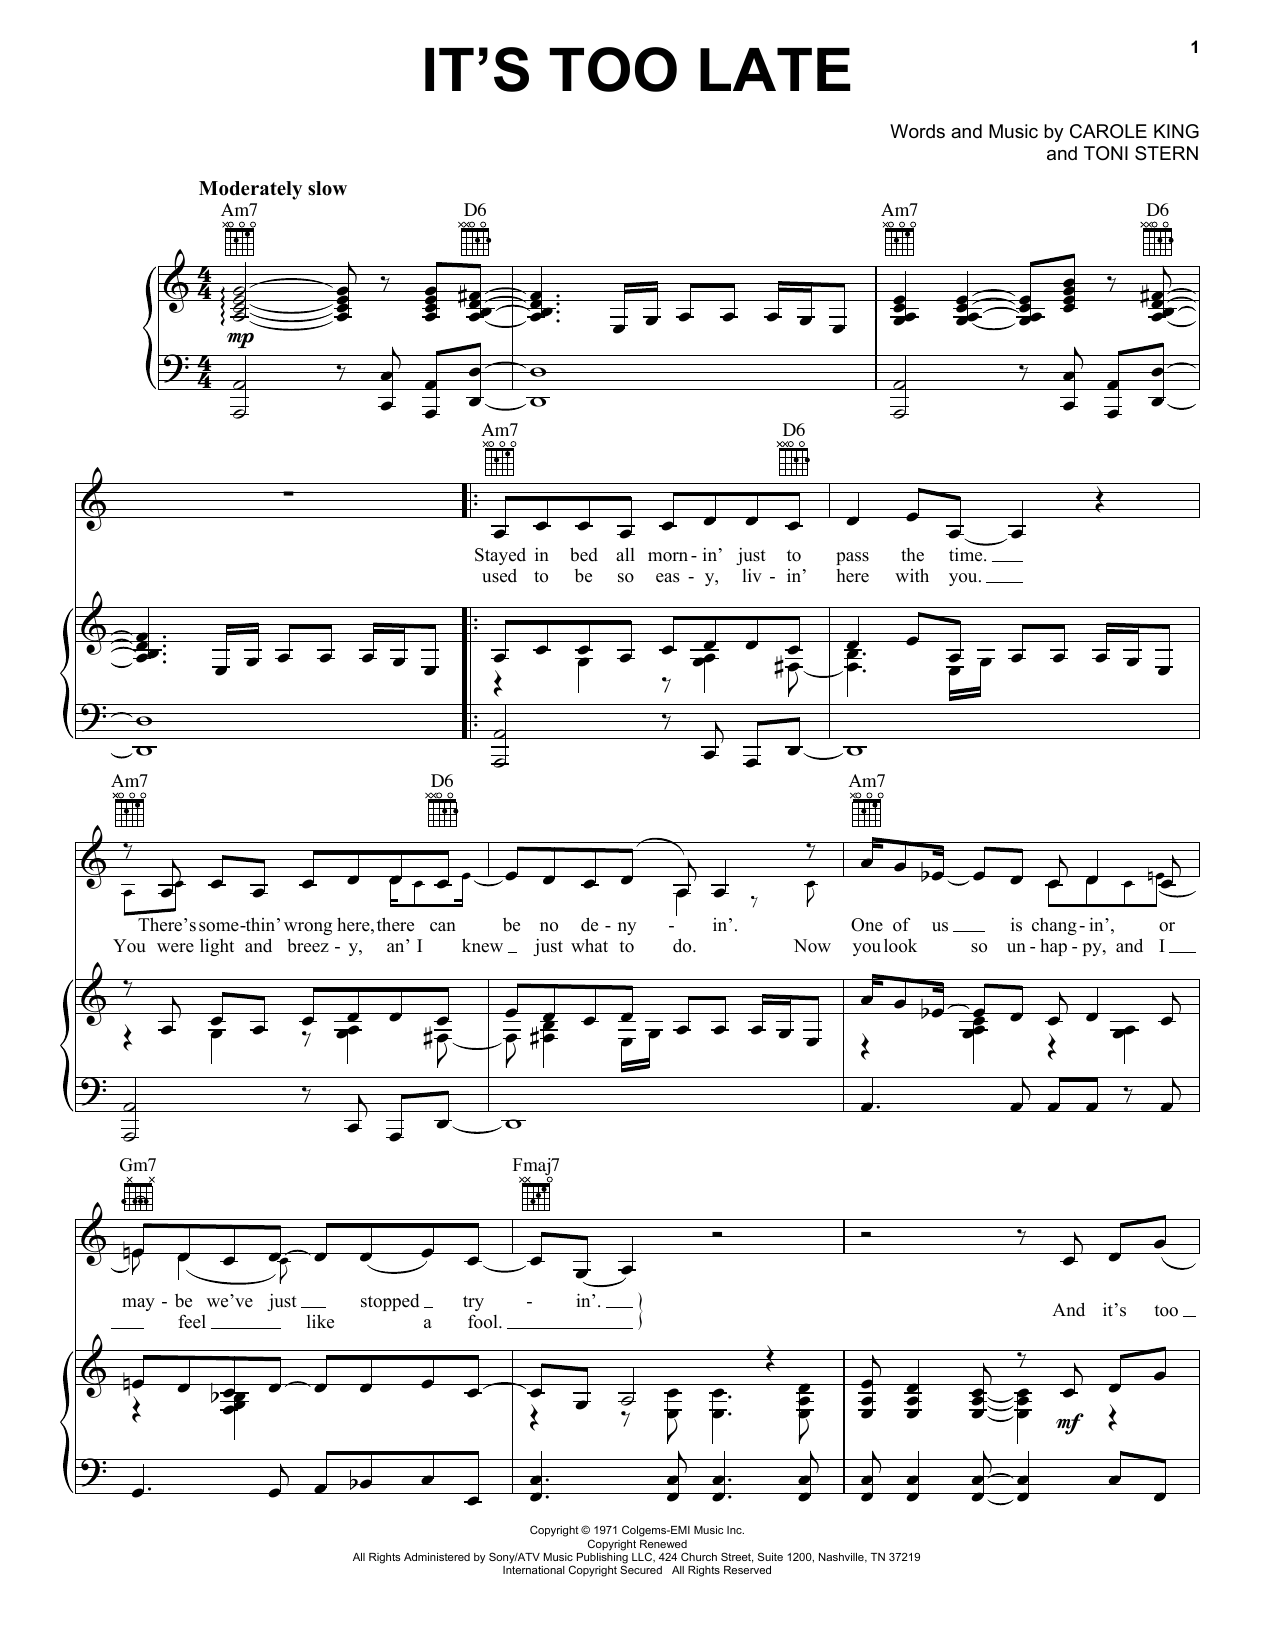 Carole King It S Too Late Sheet Music Download Printable Pdf Music Notes Score Chords